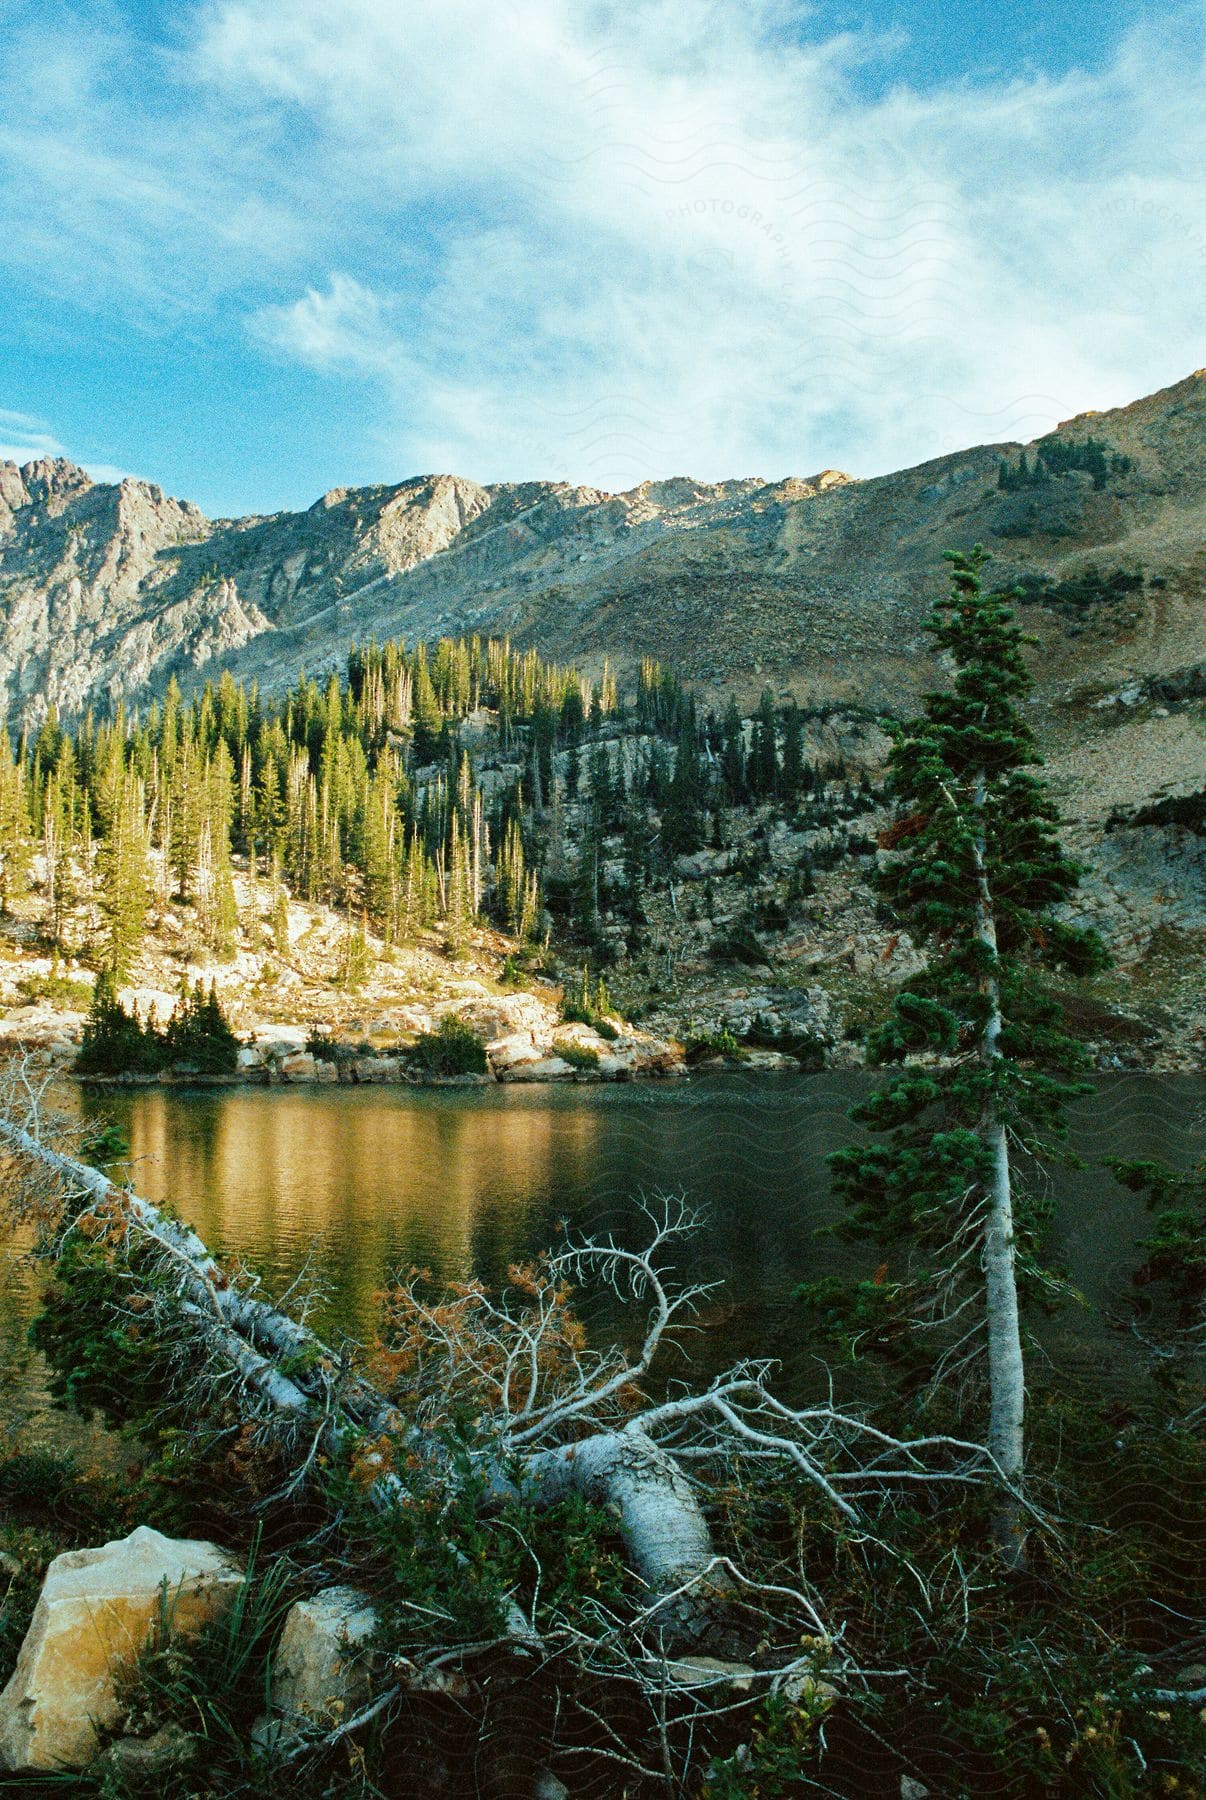 Landscape of a lake surrounded by mountains and coniferous trees under a blue sky.